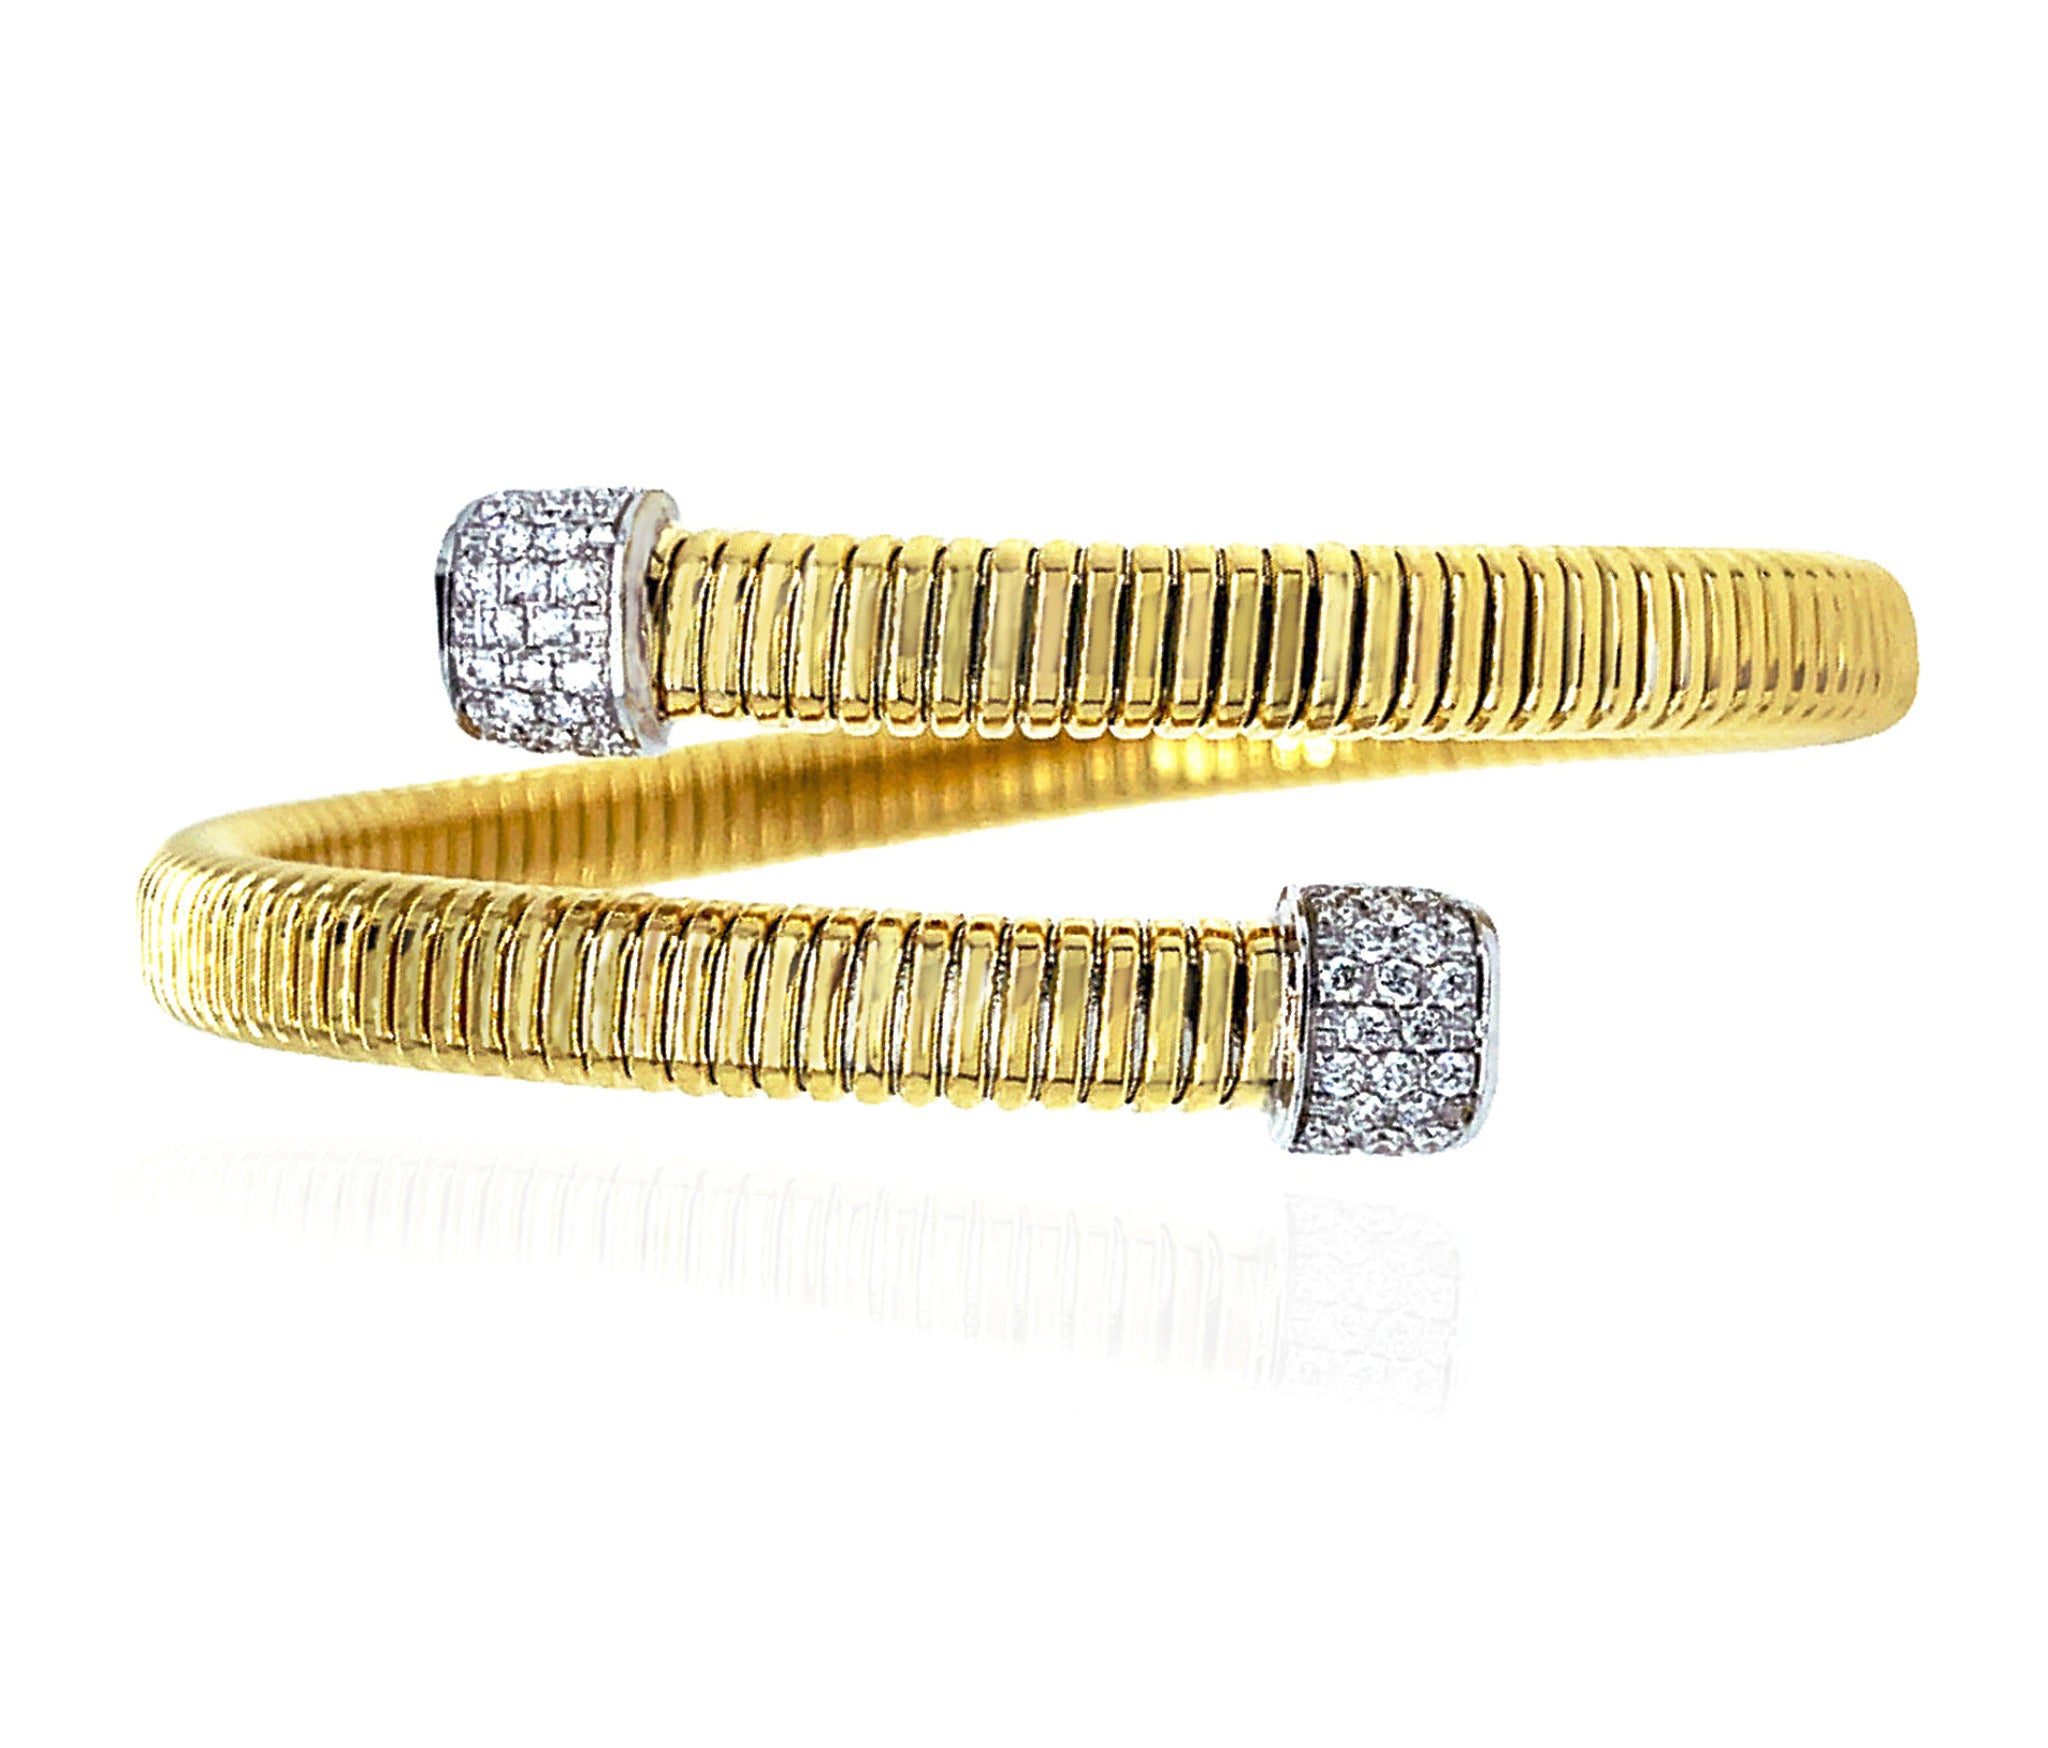 Gold Crossover Spring Cuff Bracelet with Diamond Tips